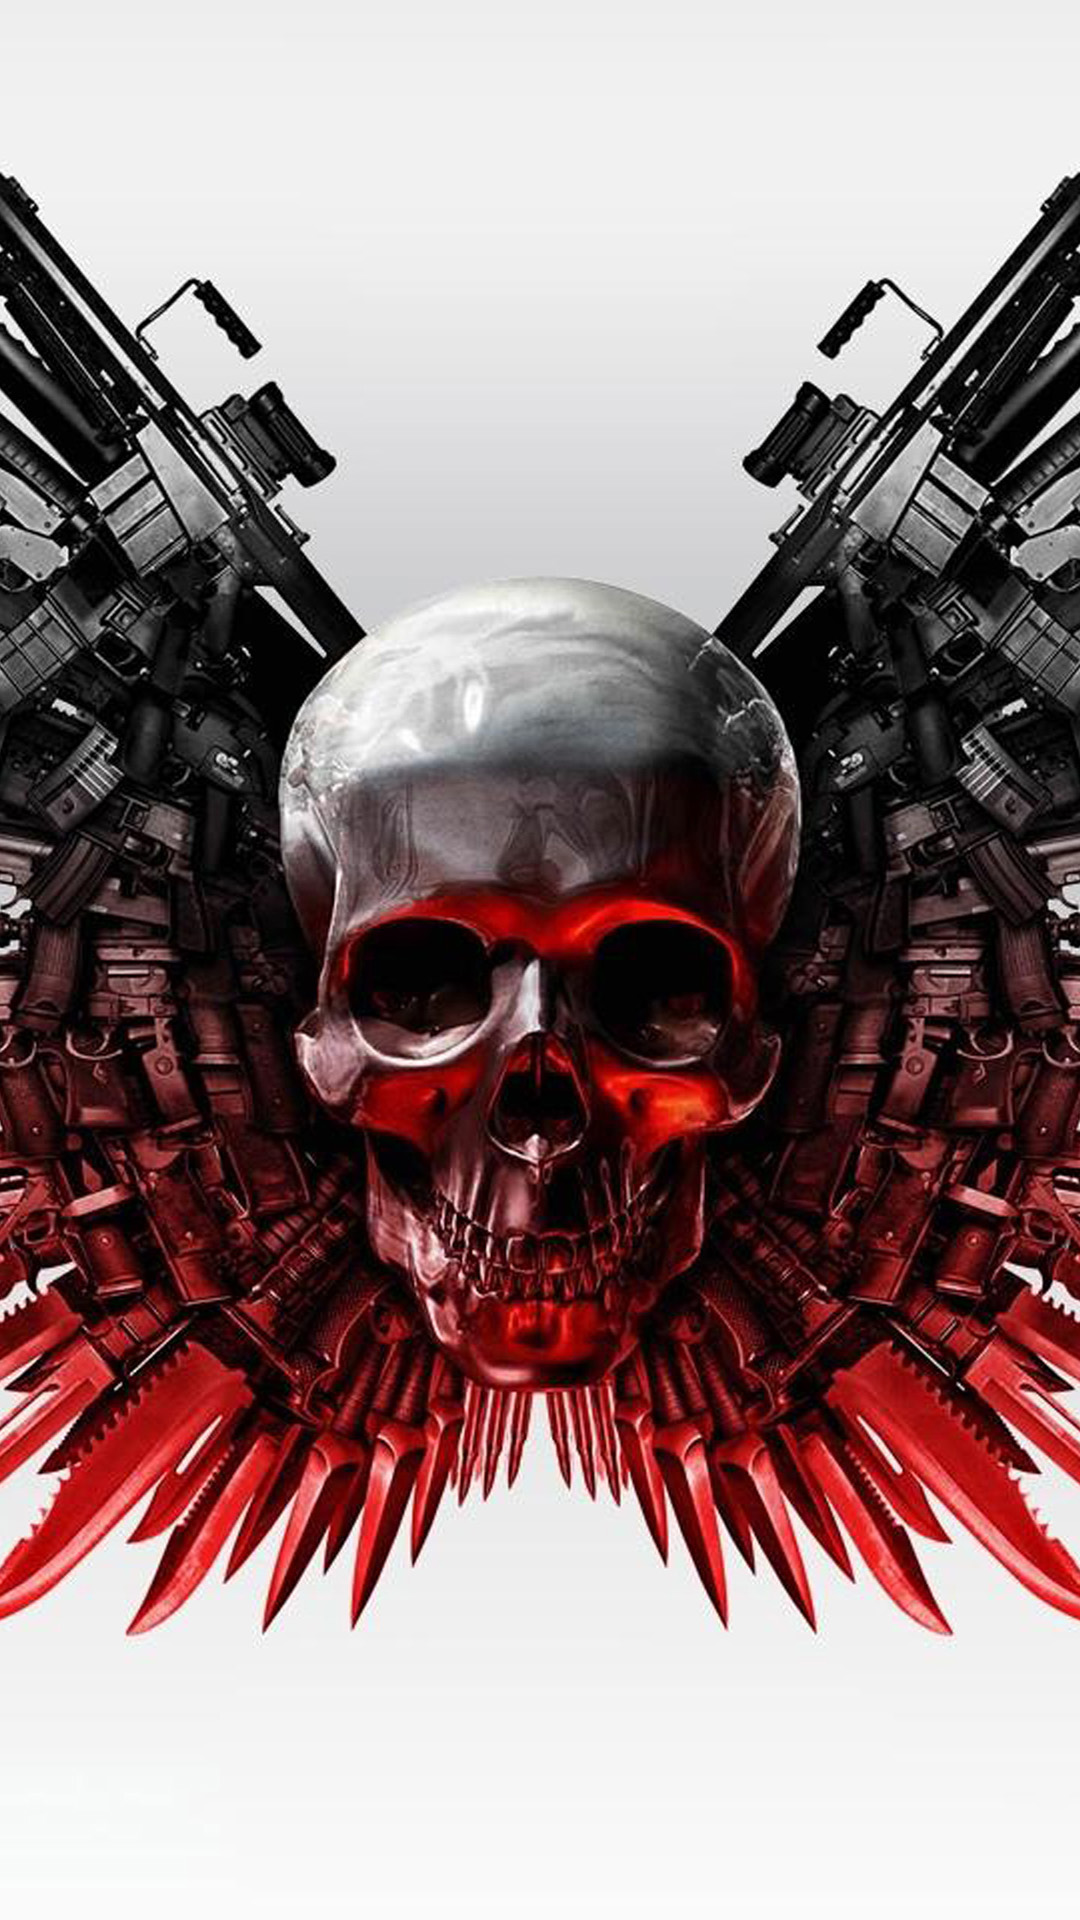 The Expendables Wallpapers